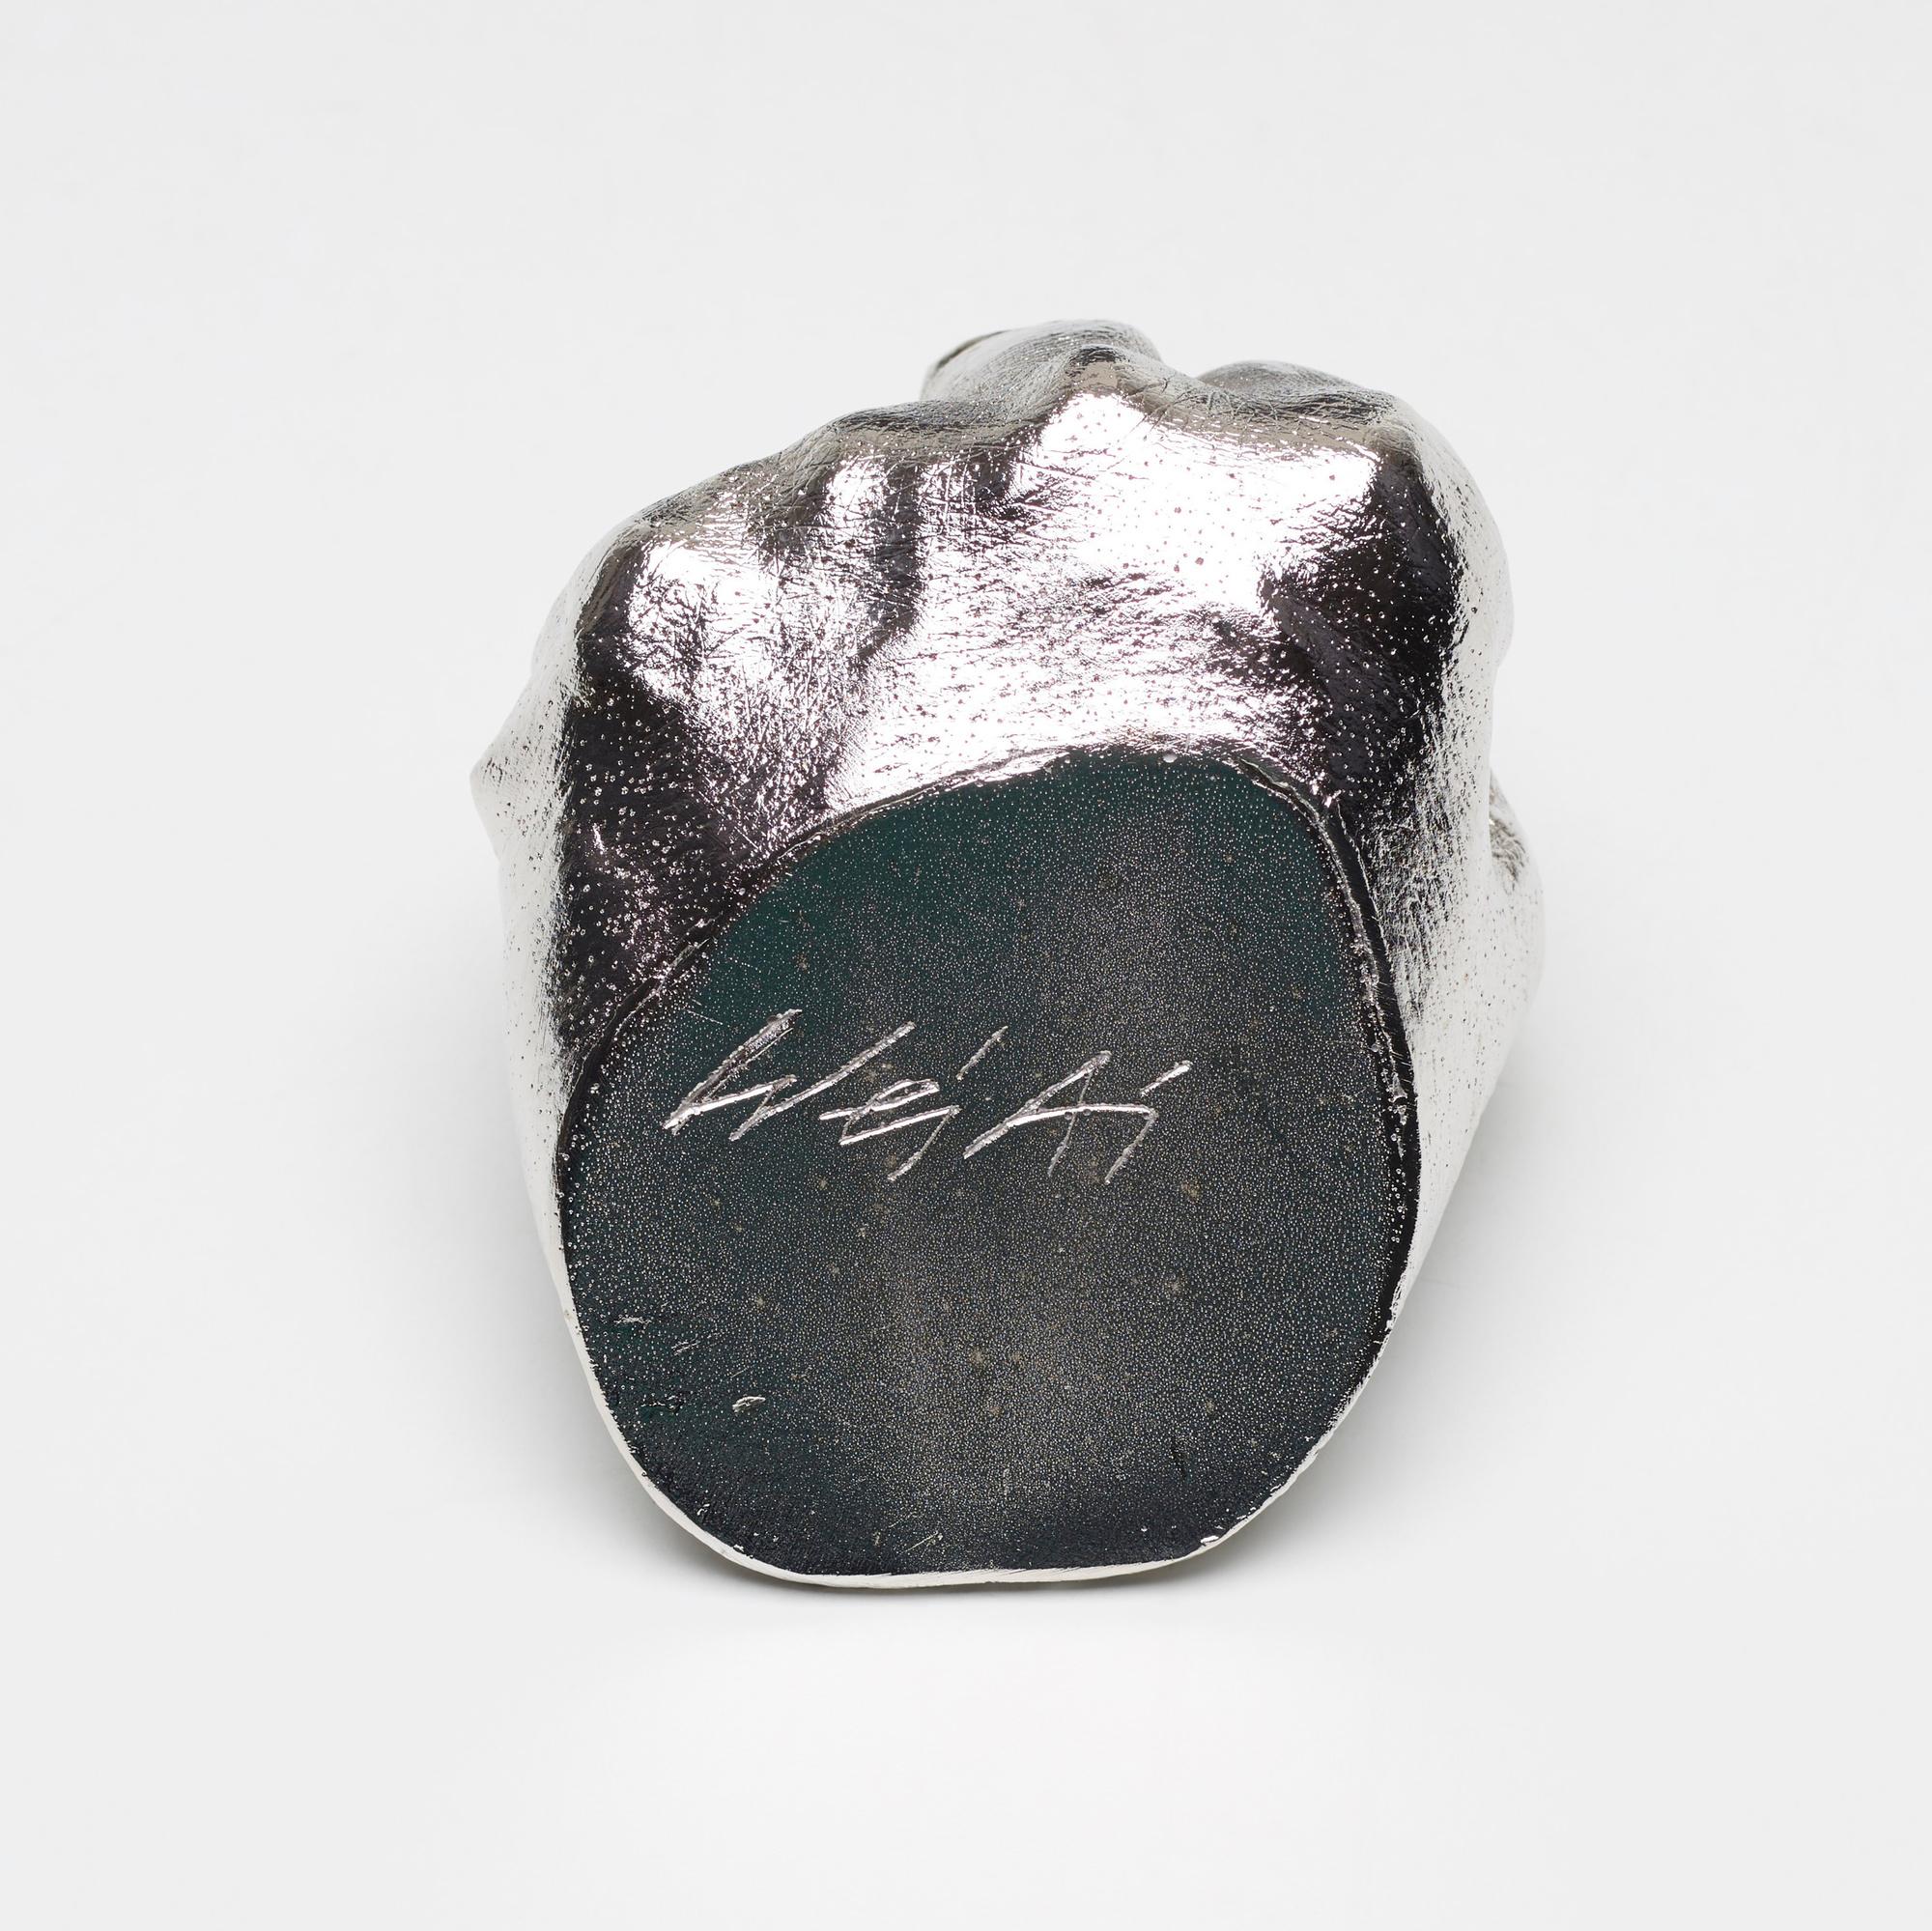 Ai Weiwei (b. 1957)
The Artist’s Hand, 2017
Artist’s signature inscribed on the base
Cast urethane resin multiple with electroplated rhodium, contained in the original cardboard presentation box
12.7 x 10.2 x 10.2 cm (5 x 4 x 4 in.)
Edition of